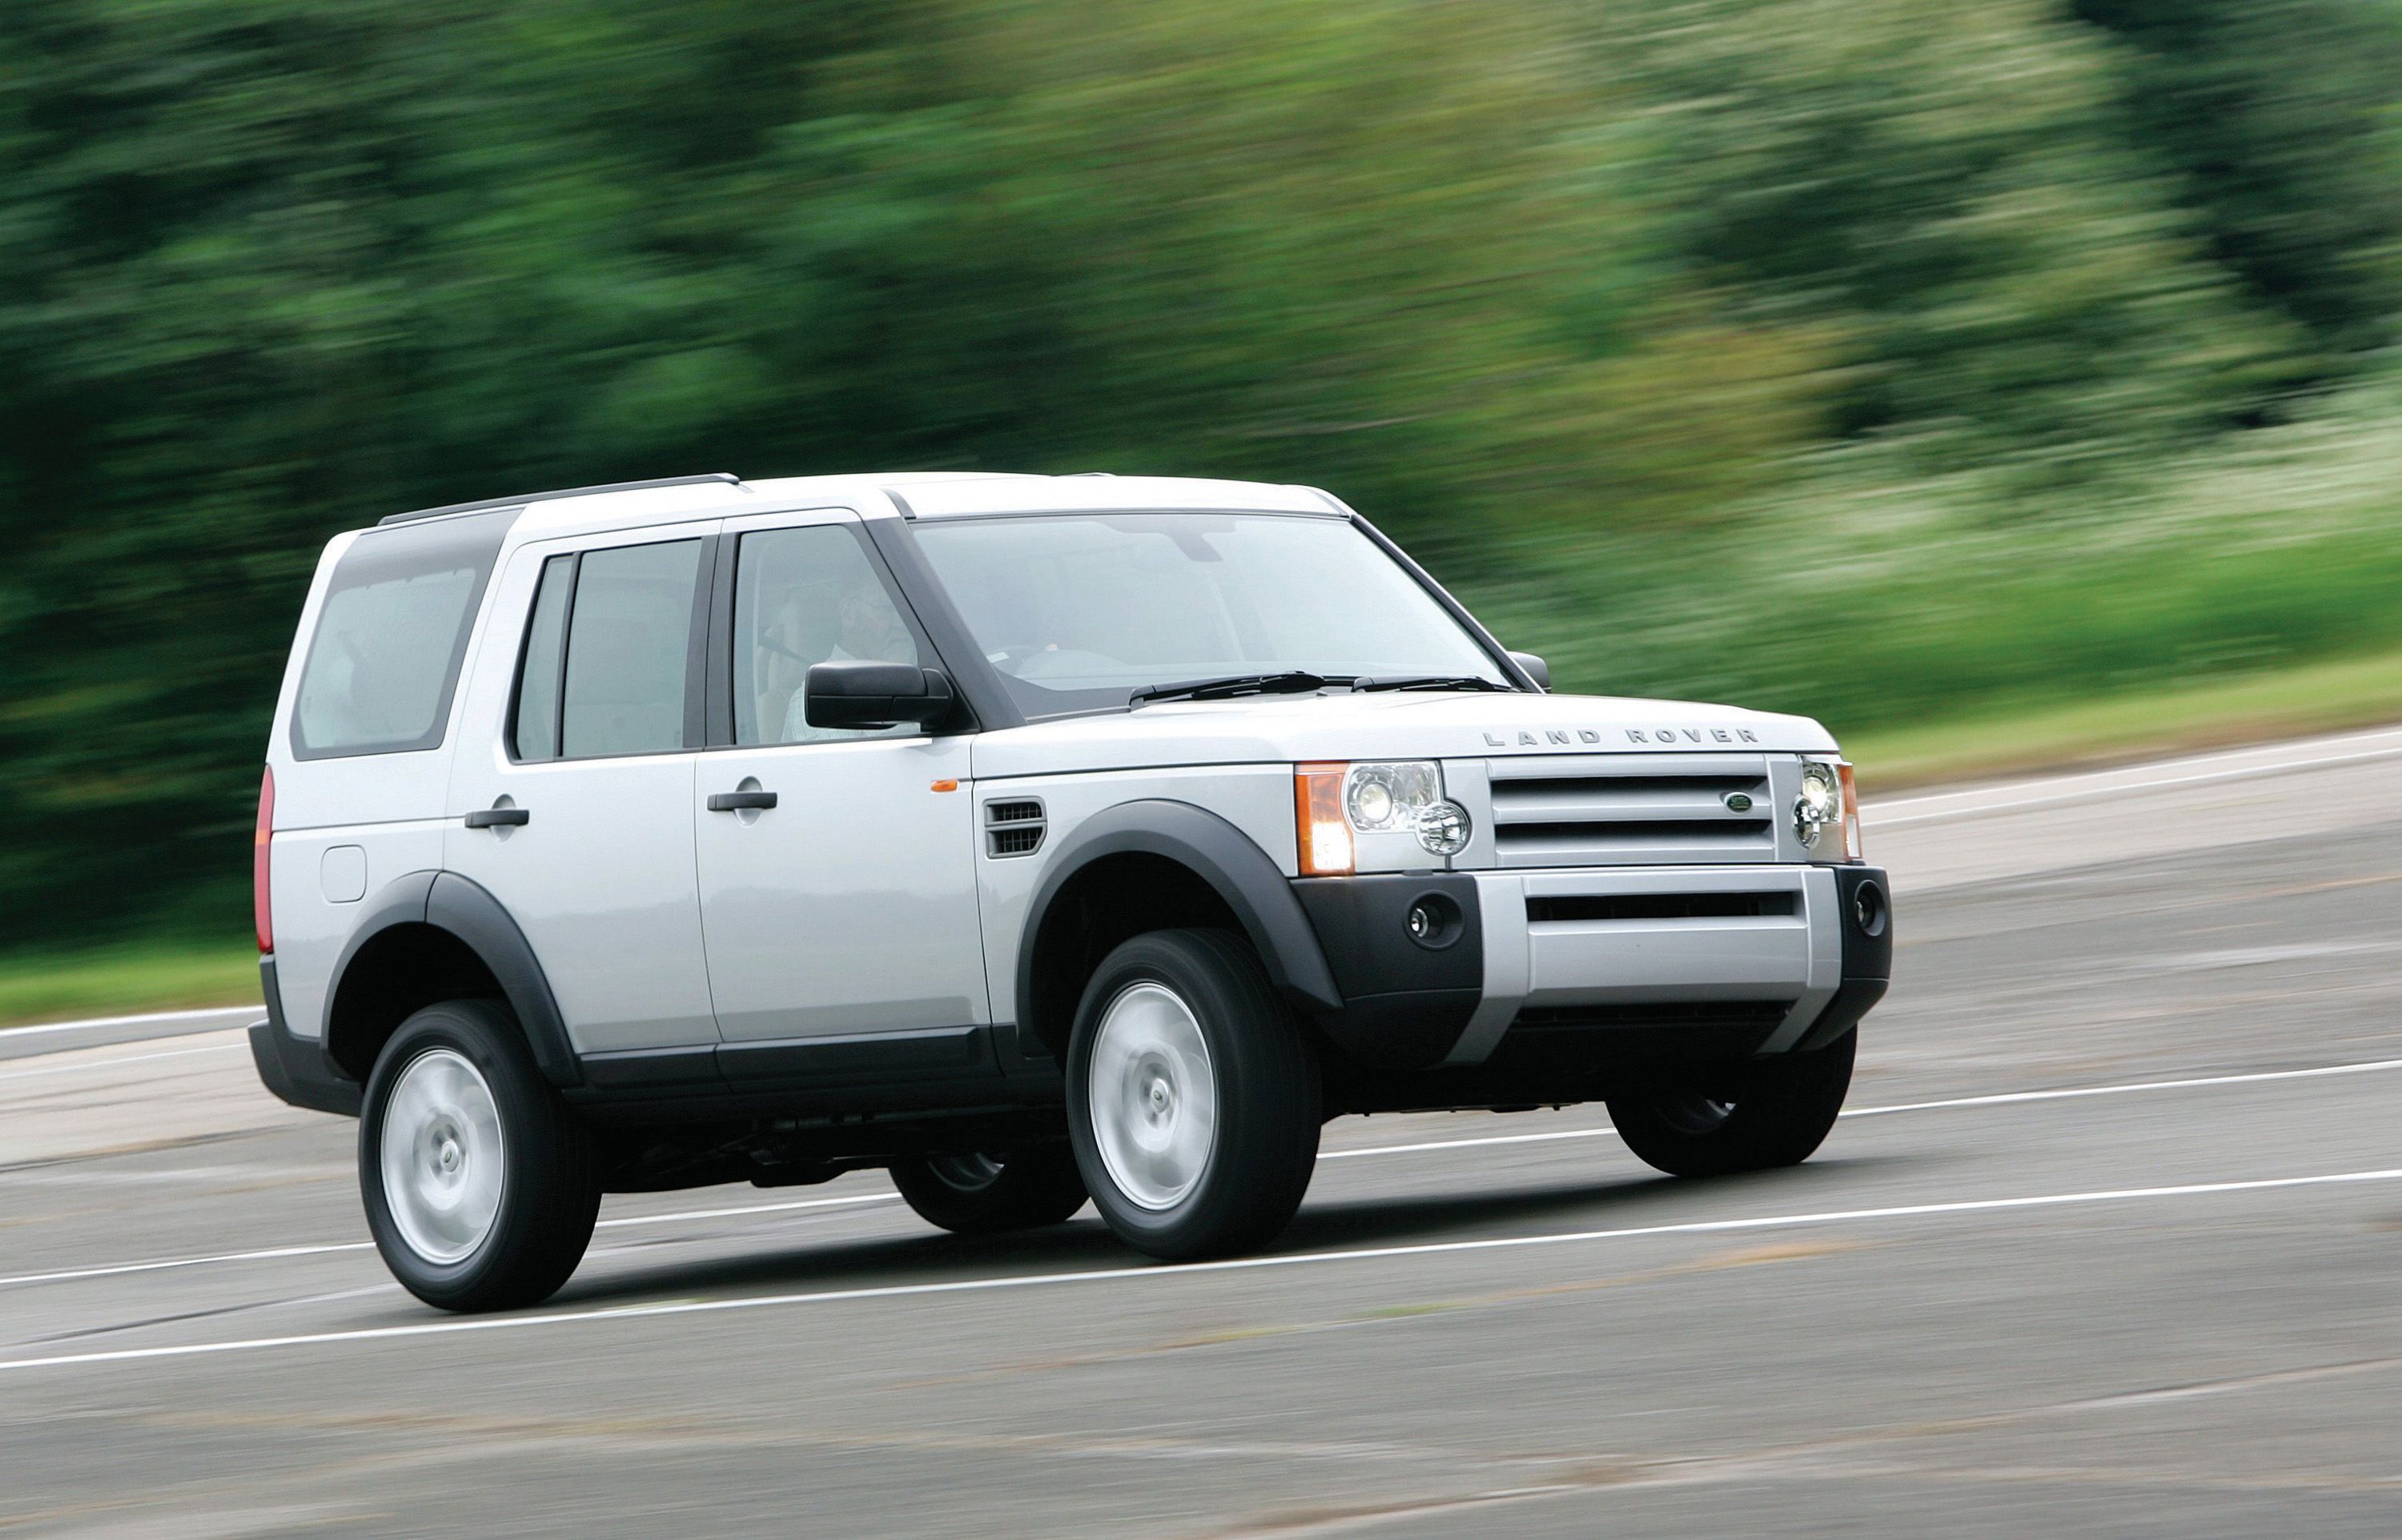 Here's Why the Land Rover Lr3 is a Great Budget Off-Roader